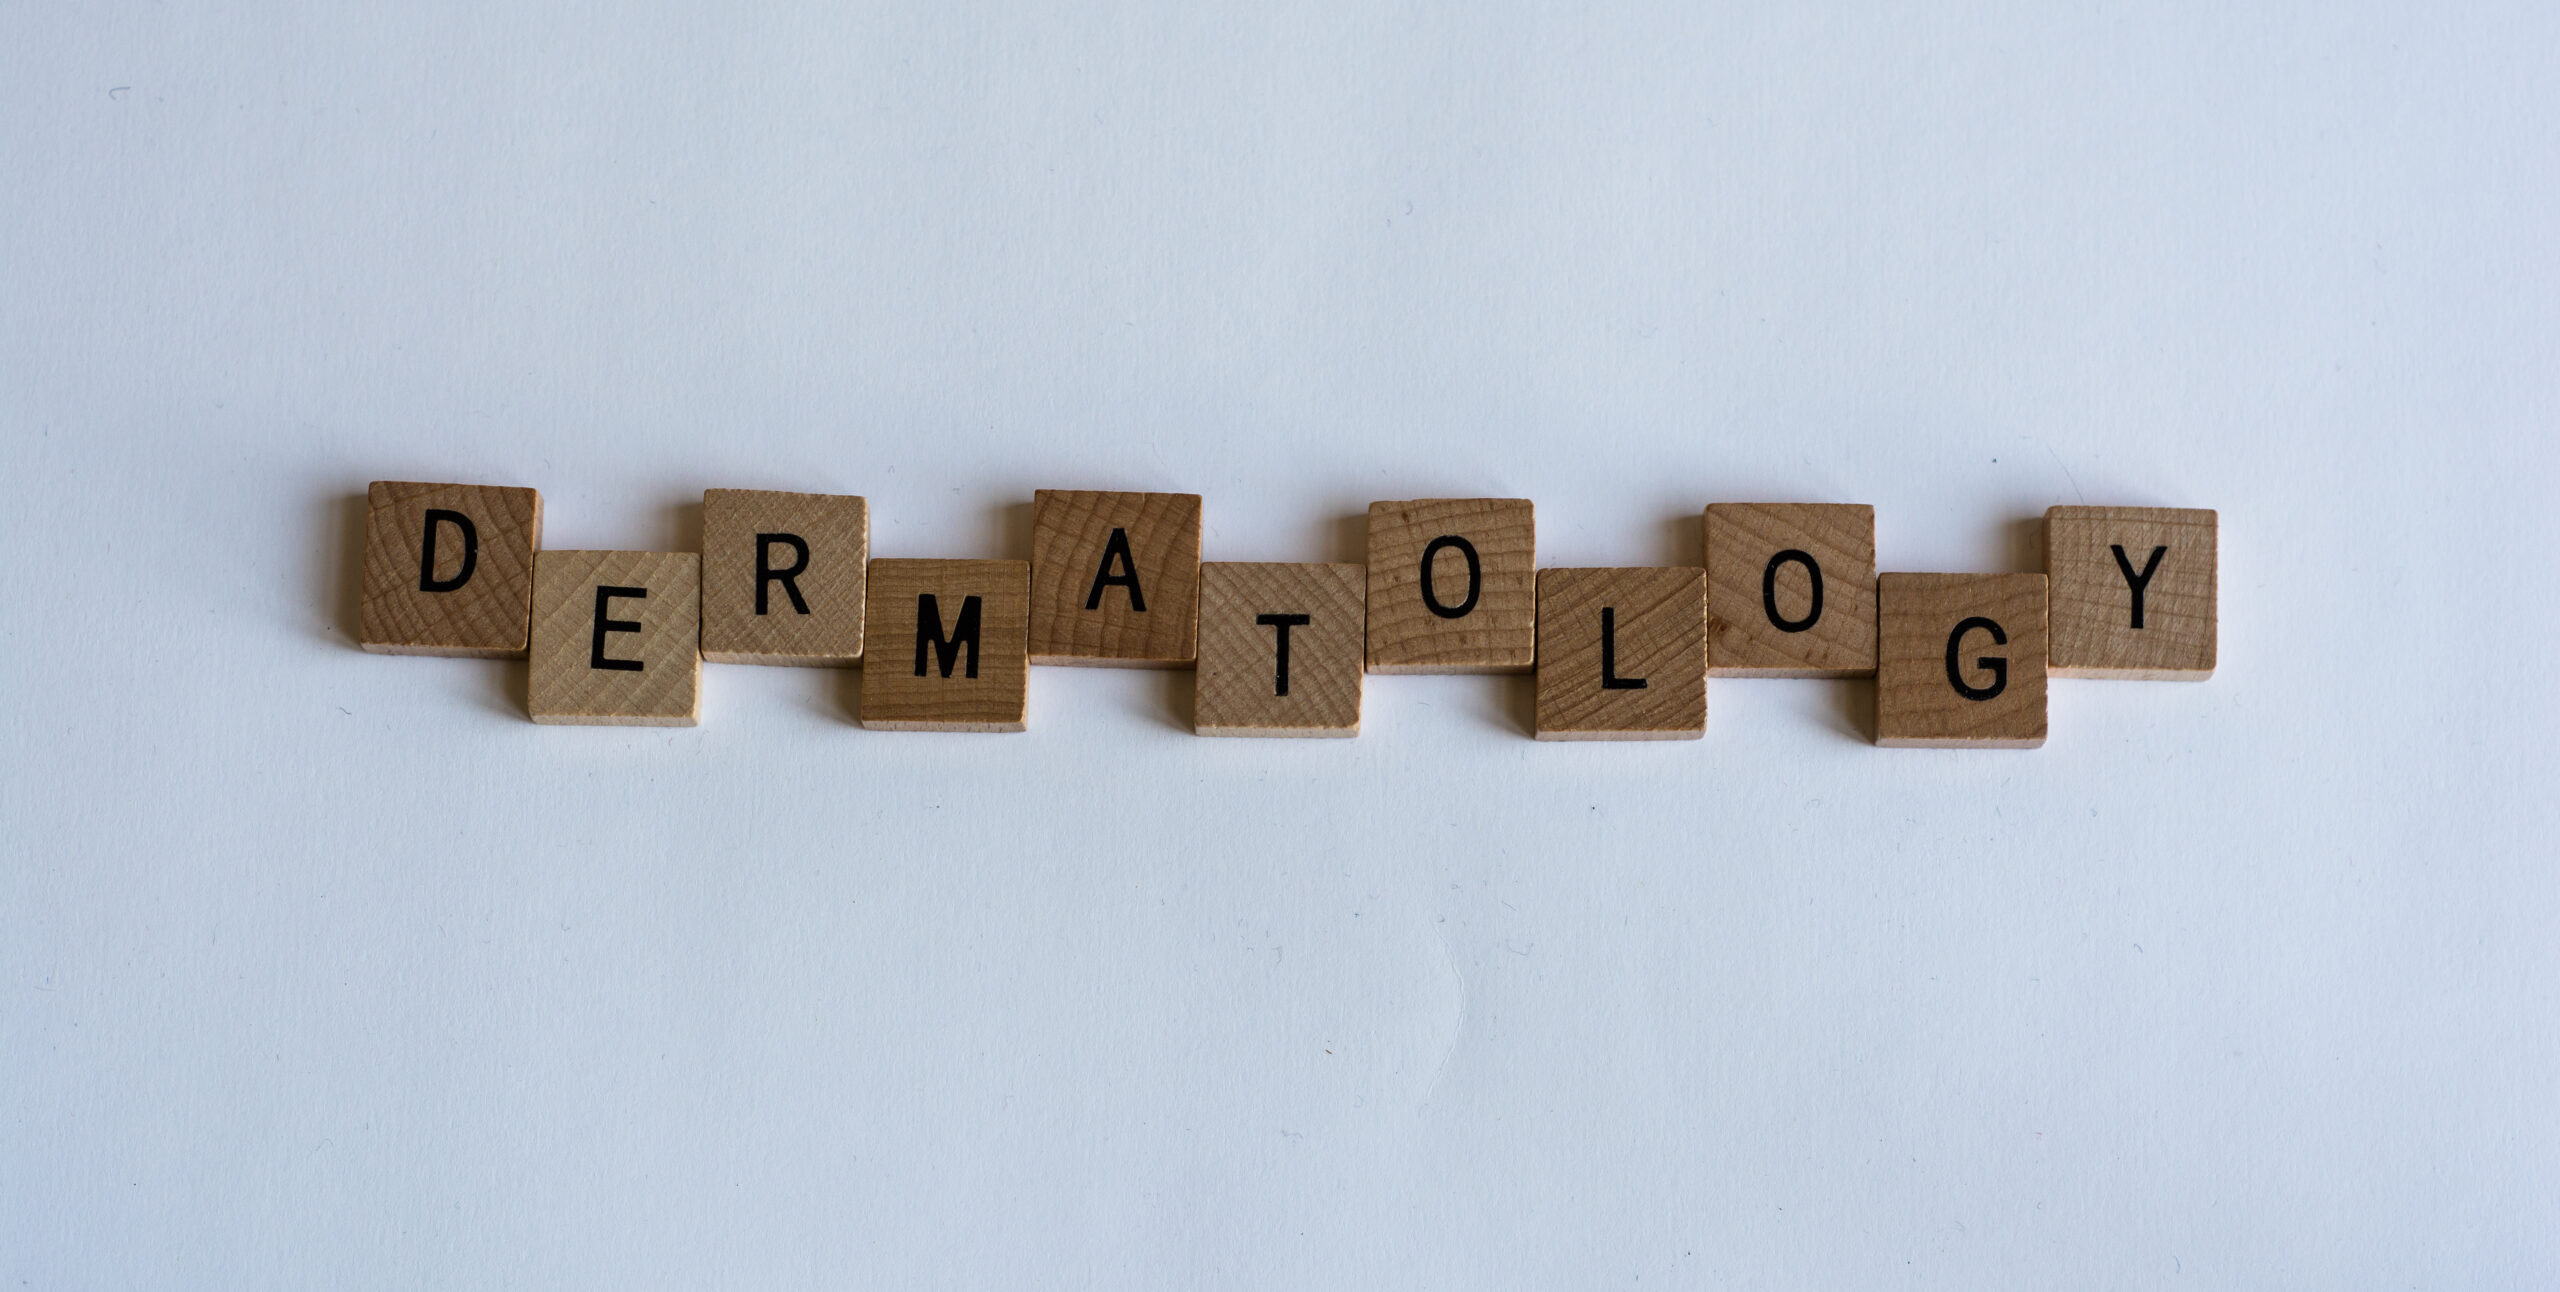 The word 'dermatology' spelled out using scrabble letters